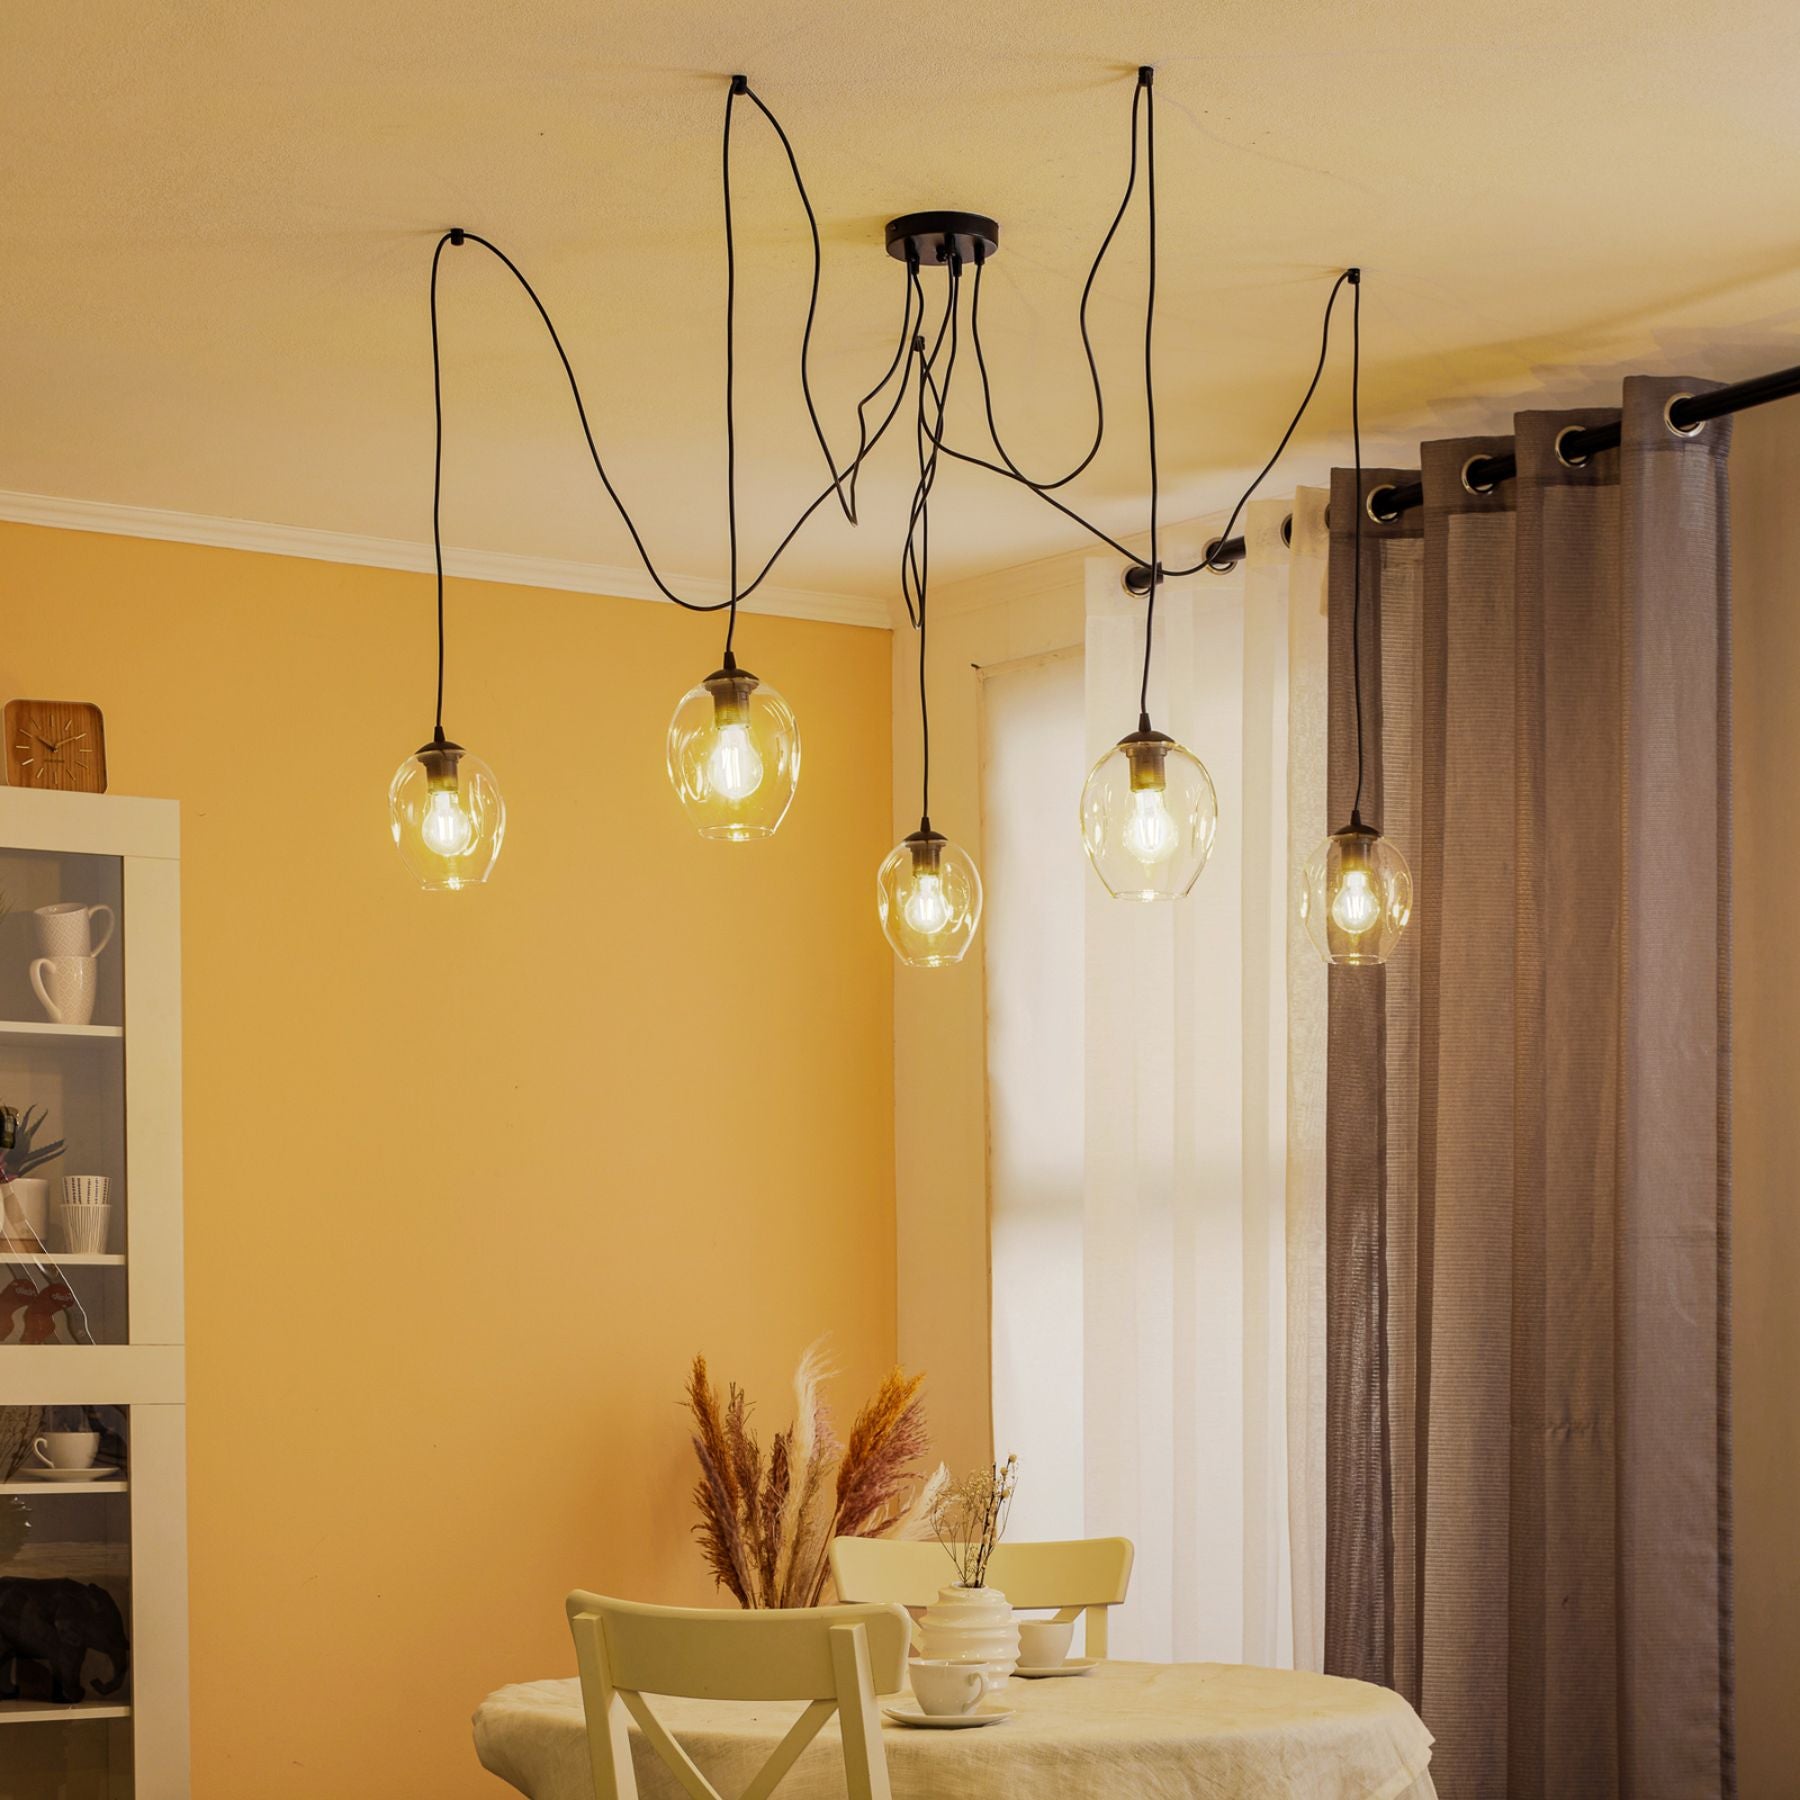 the technique of using hanging lamp clusters is especially effective in rooms with high ceilings or central accents